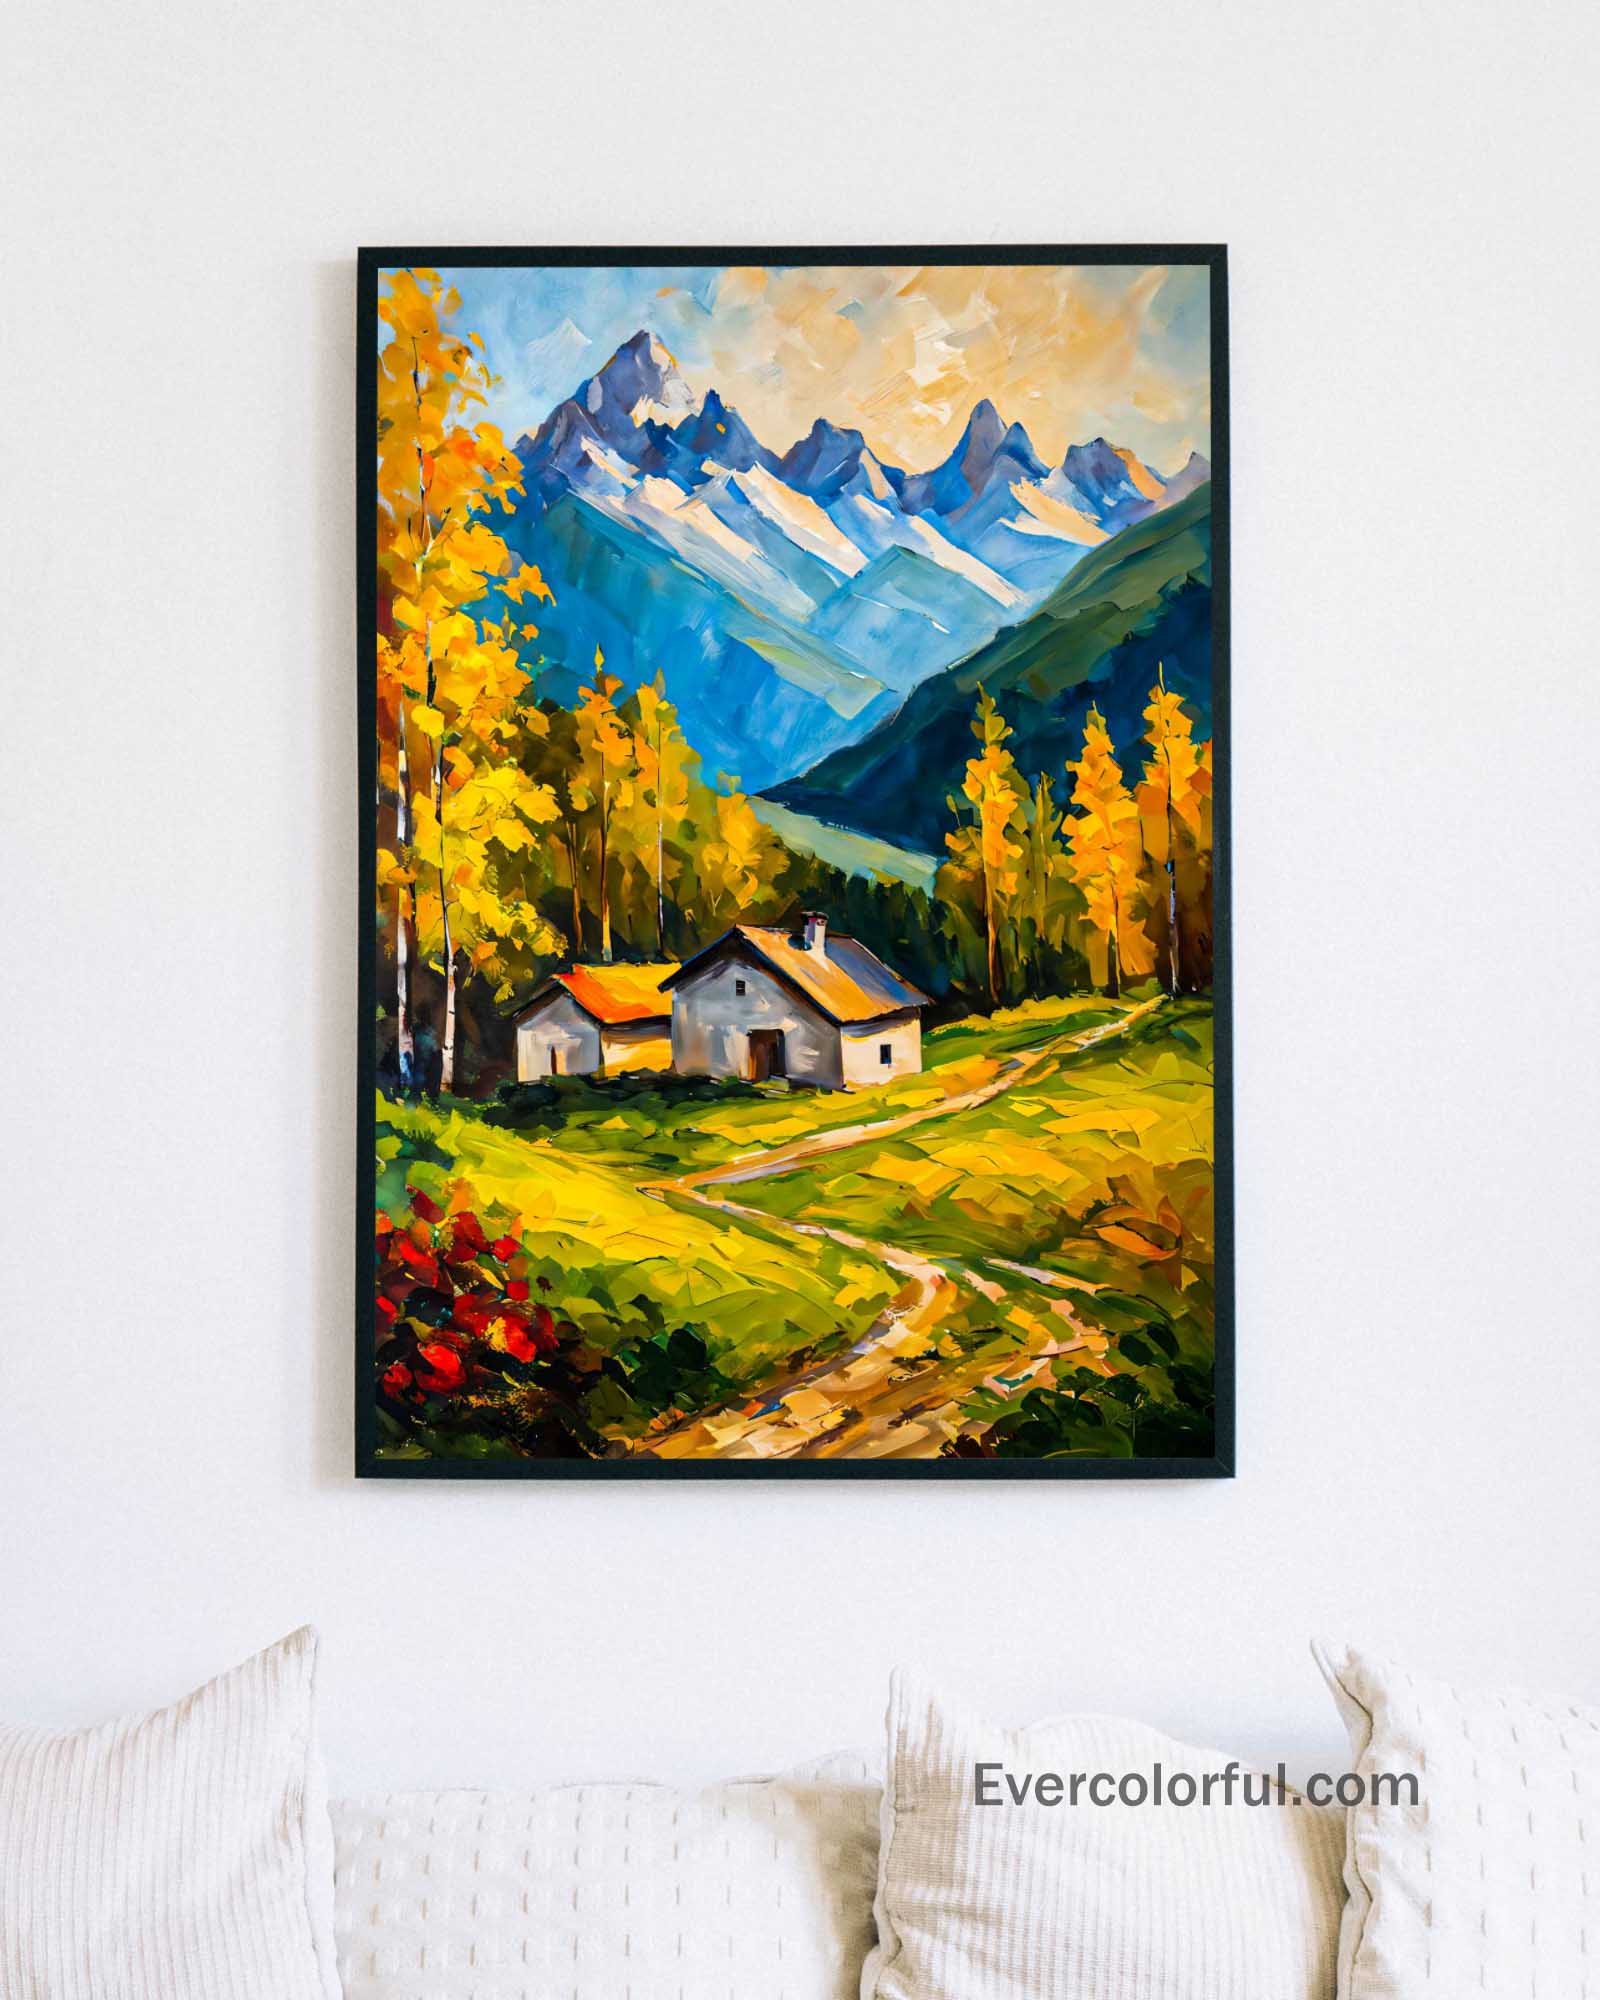 Austrian hills - Poster - Ever colorful